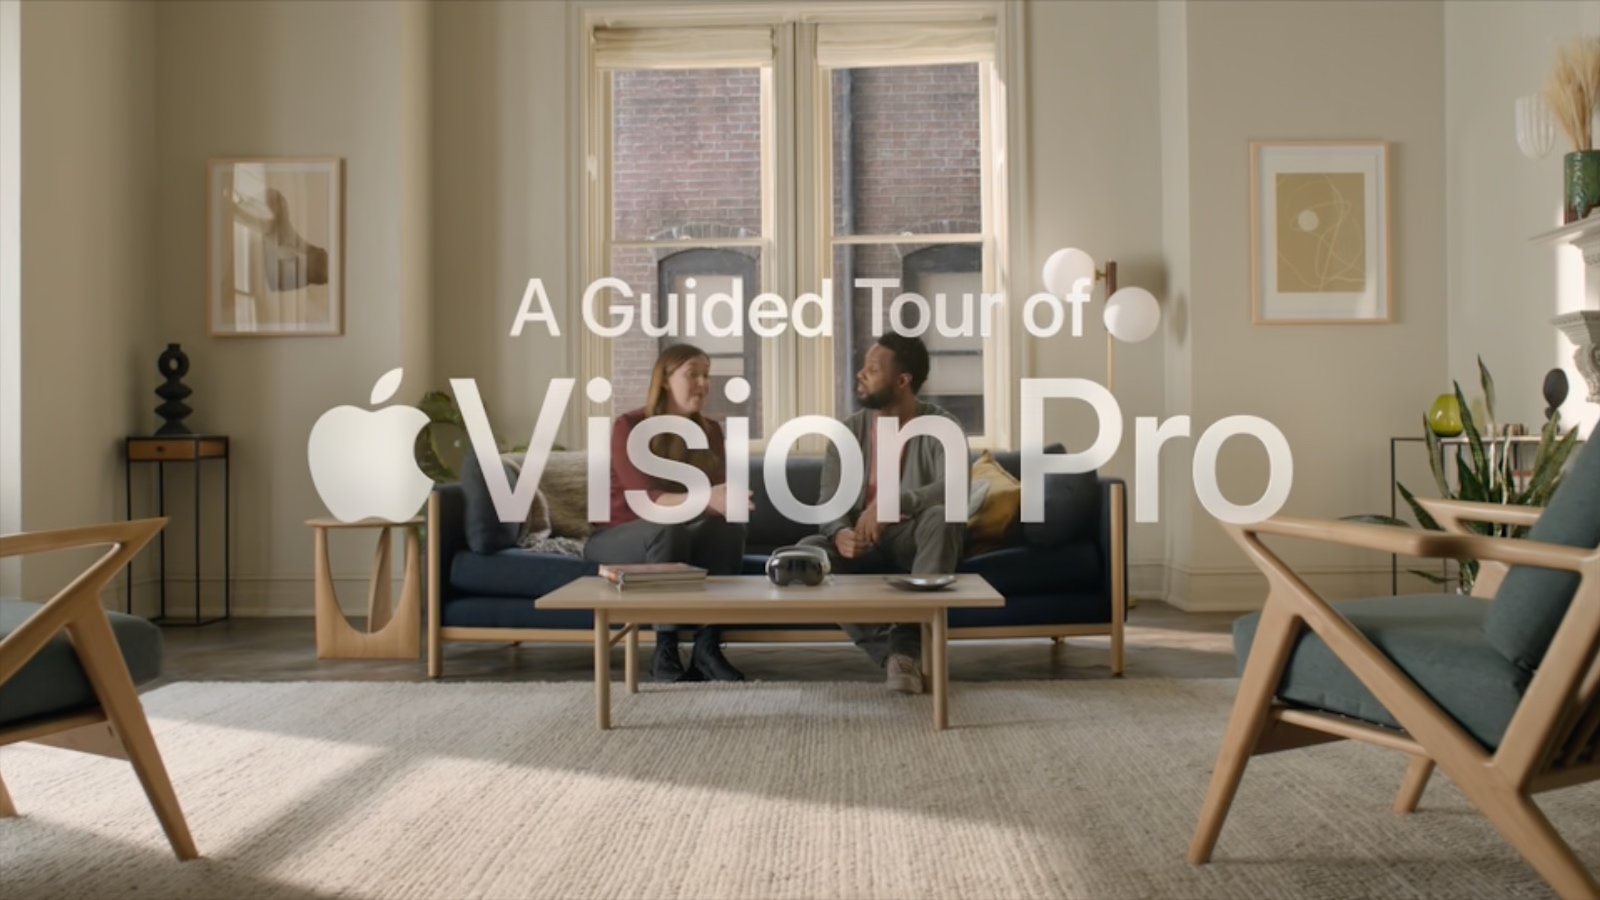 Apple Shares Vision Pro Guided Tour Walkthrough Video